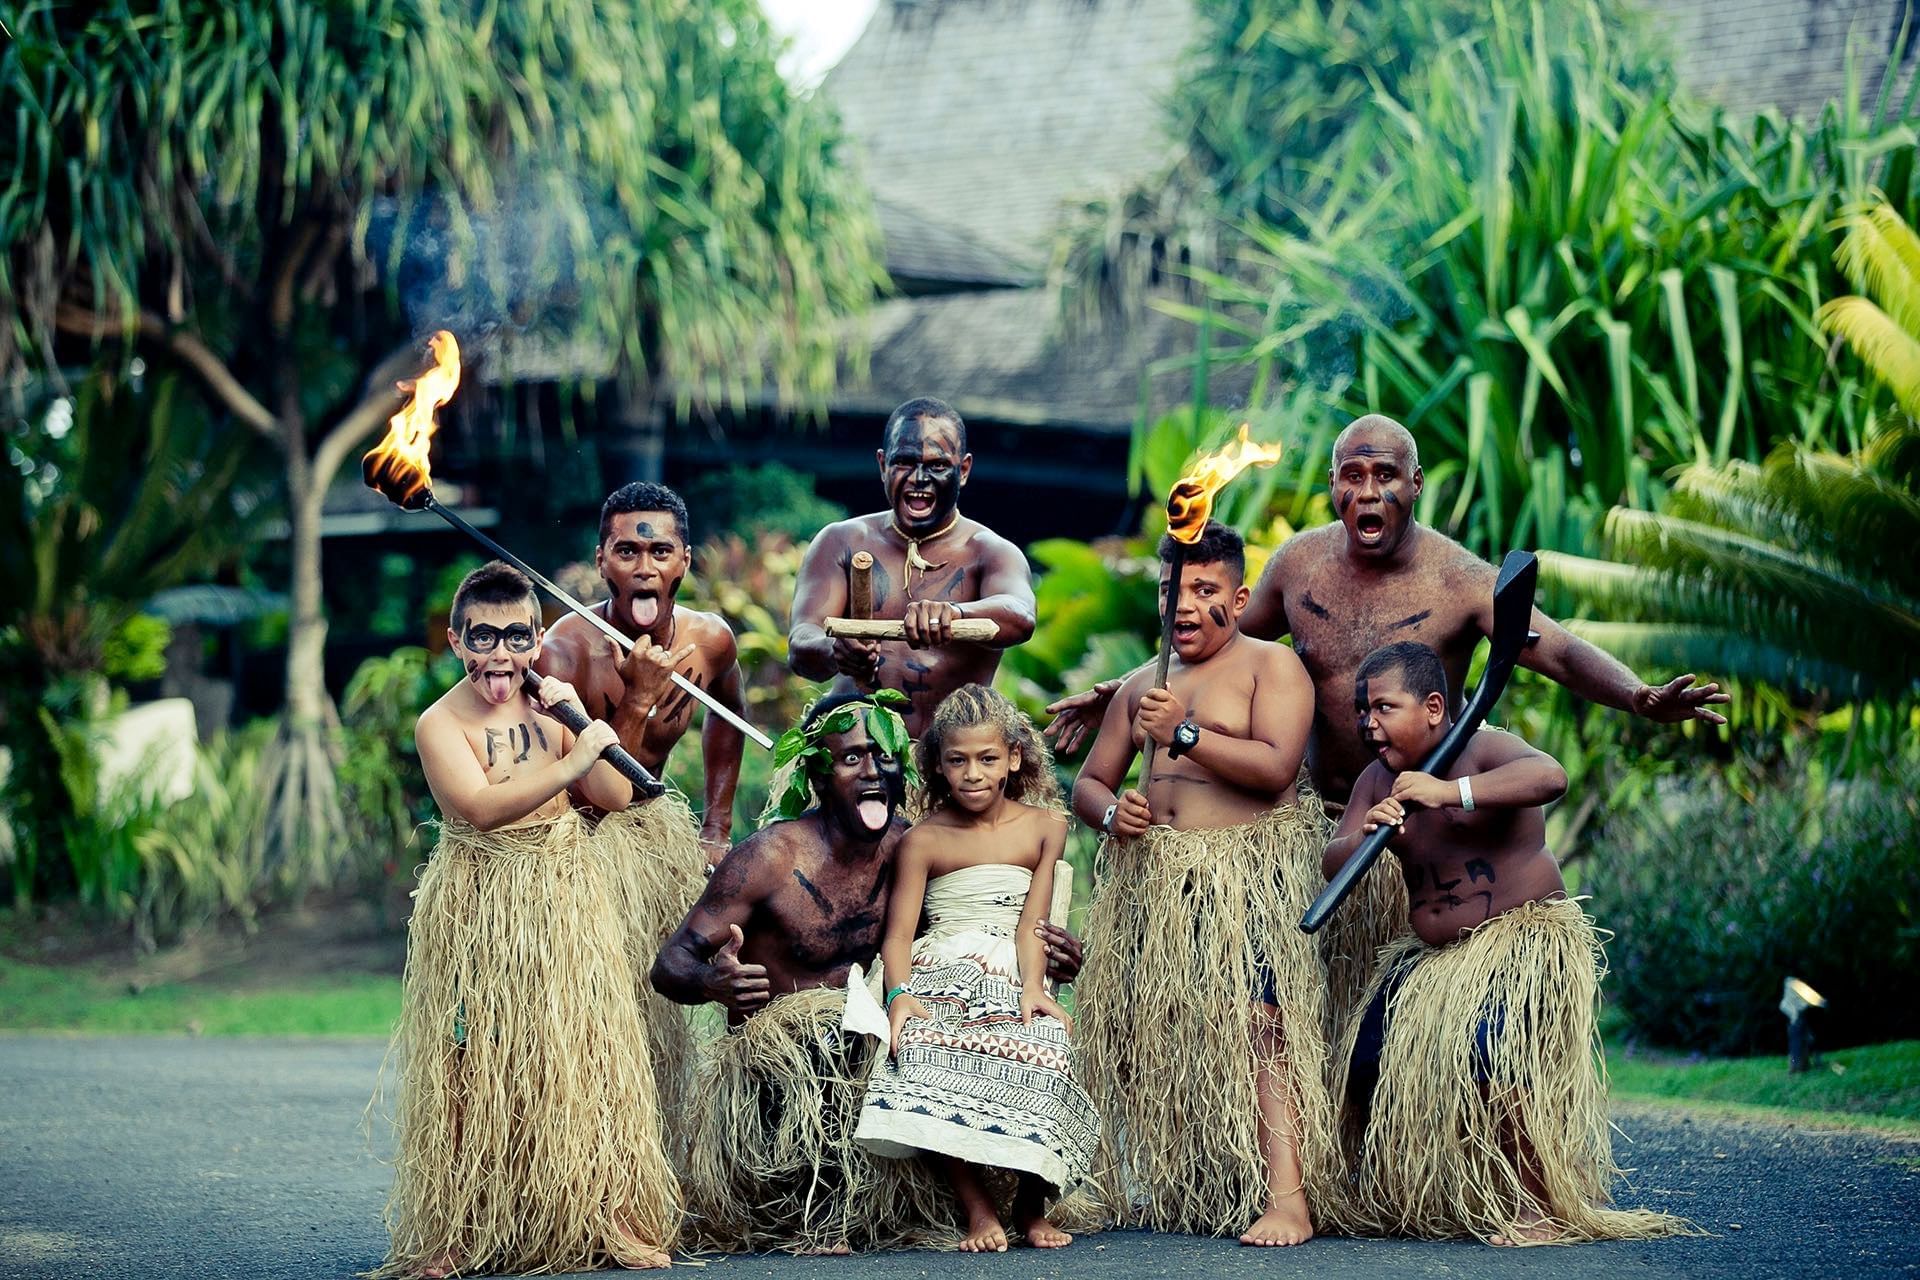 Group picture taken with traditional wear at The Naviti Resort